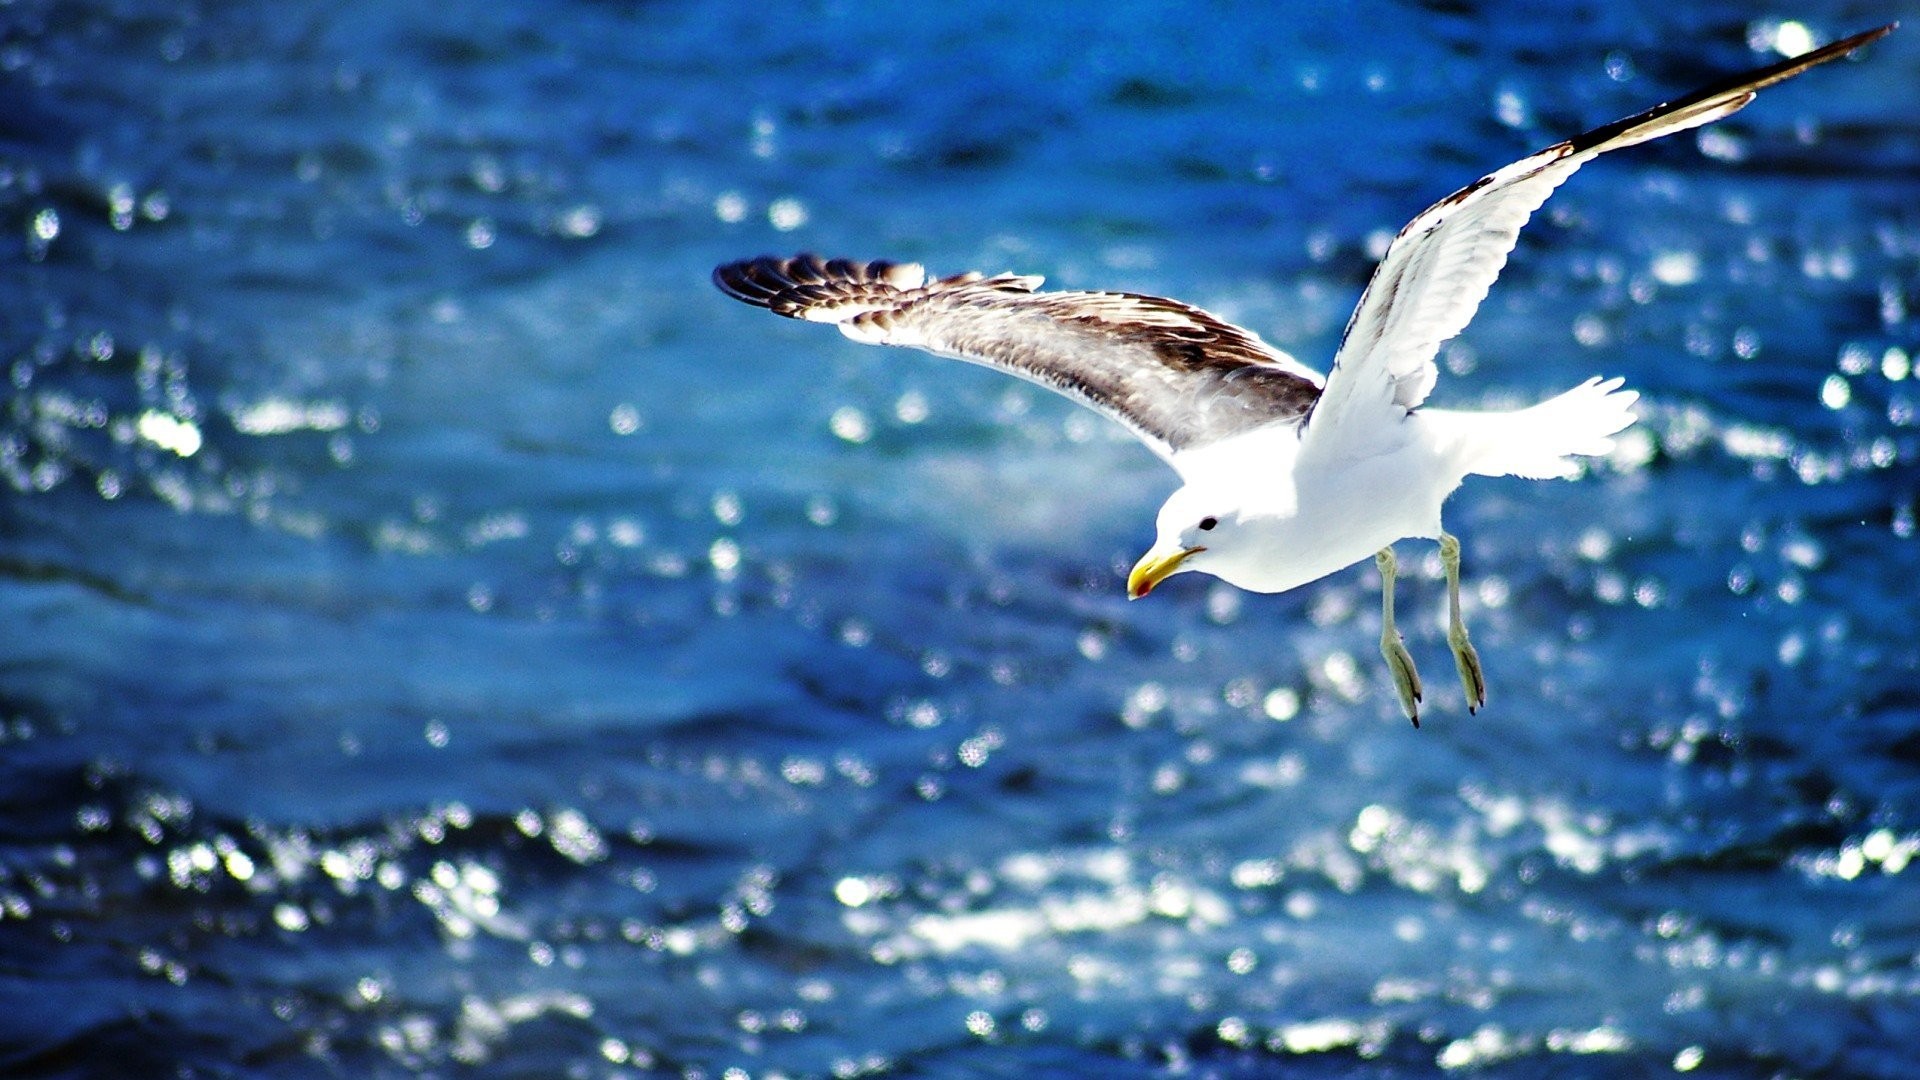 General 1920x1080 seagulls water birds animals nature wings flying